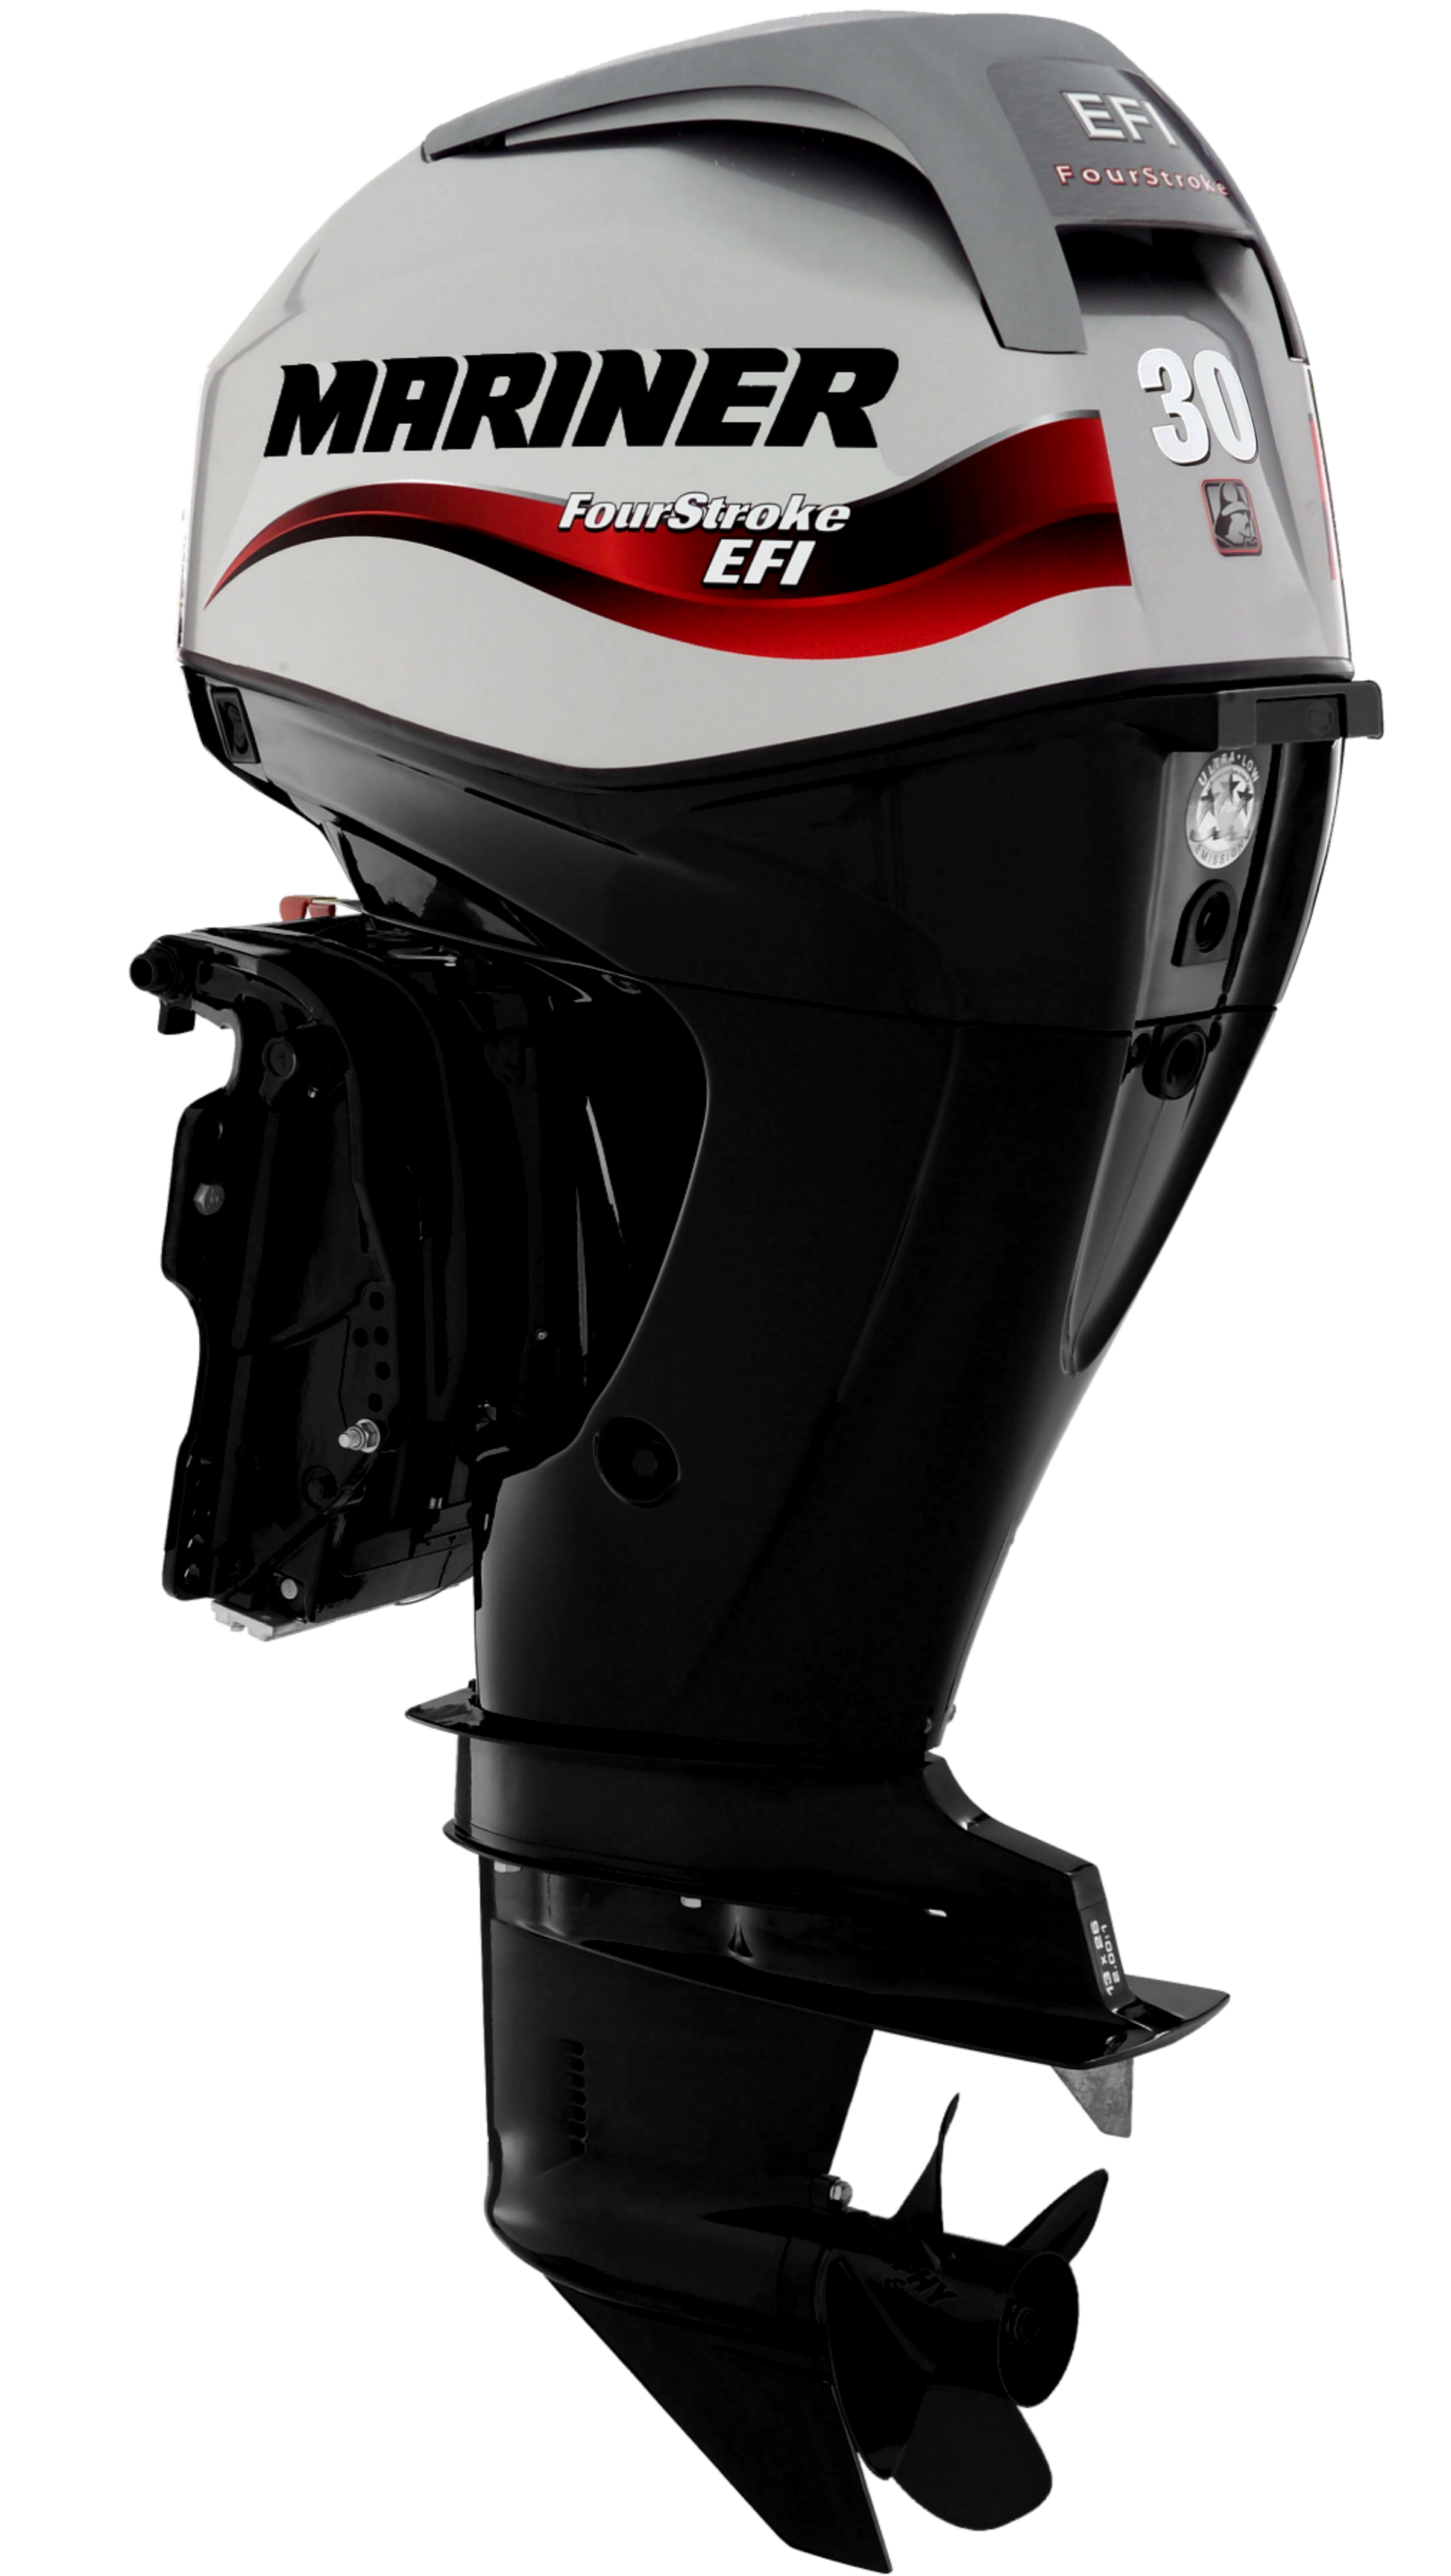 Mariner Four Stroke 30hp Outboard